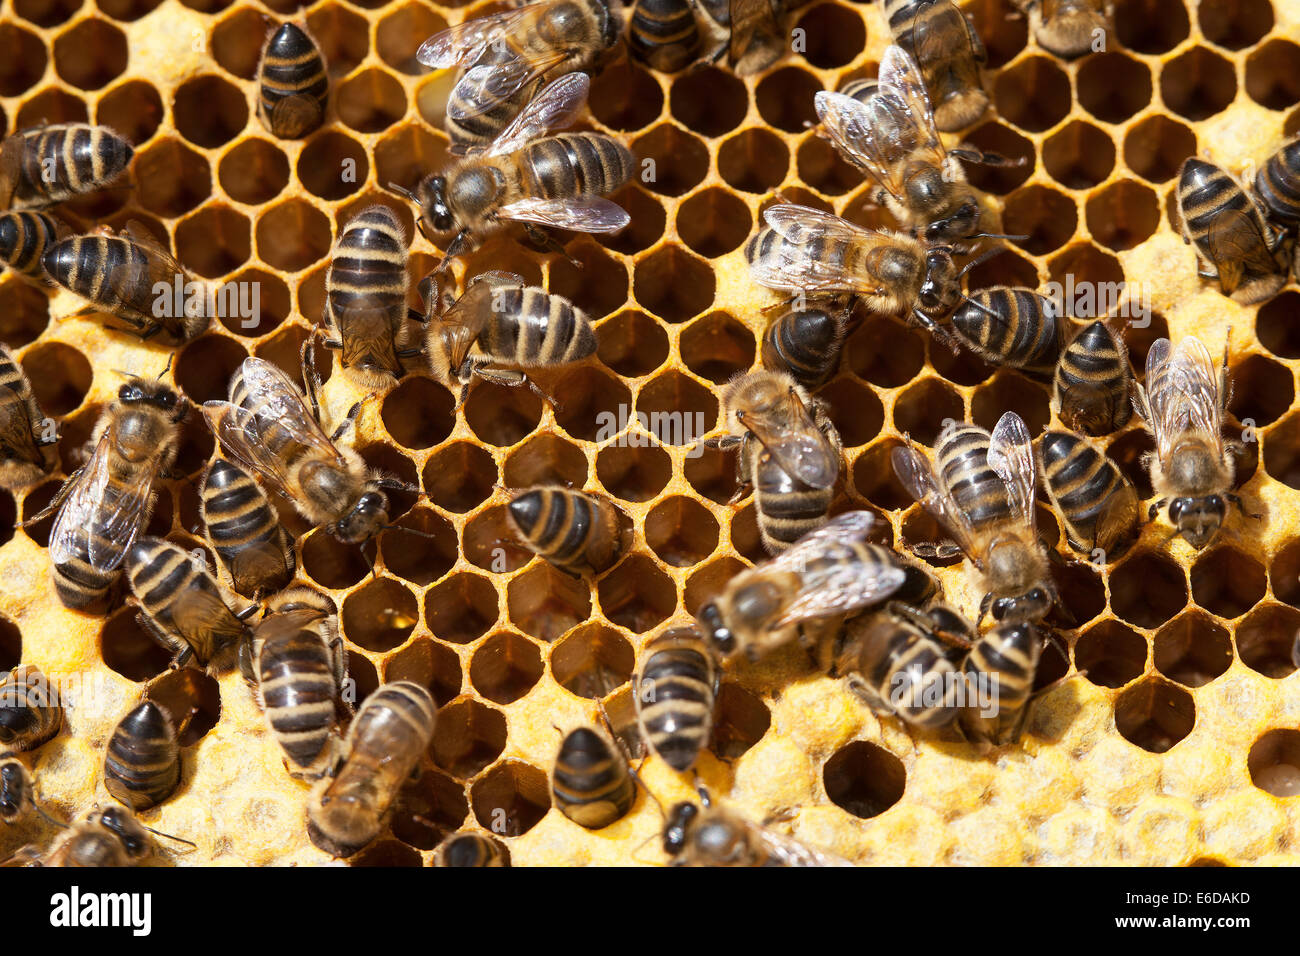 English worker honeybees in hive preparing and cleaning empty cells before egg laying by Queen Bee Stock Photo